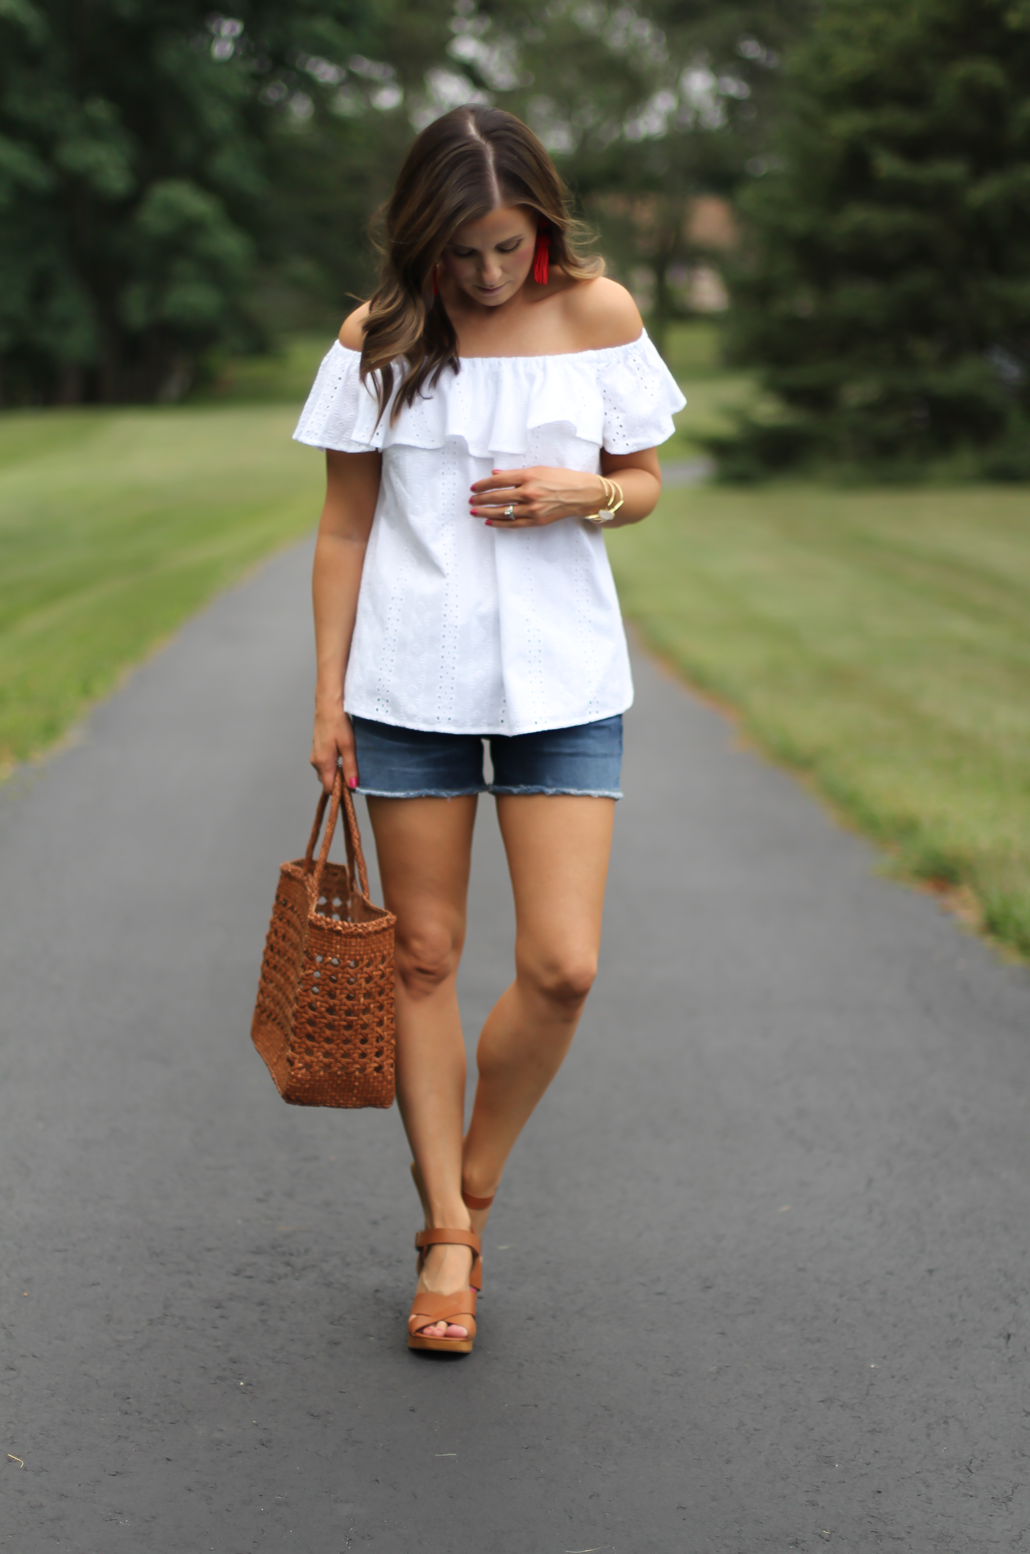 White Eyelet Off the Shoulder Blouse, Dark Rinse Cutoff Denim Shorts, Tan Leather Wedge Sandal, Leather Basket Tote, Red Tassel Earrings, Anthropologie, Citizens of Humanity, Madewell, J.Crew, Lisi Lerch 2